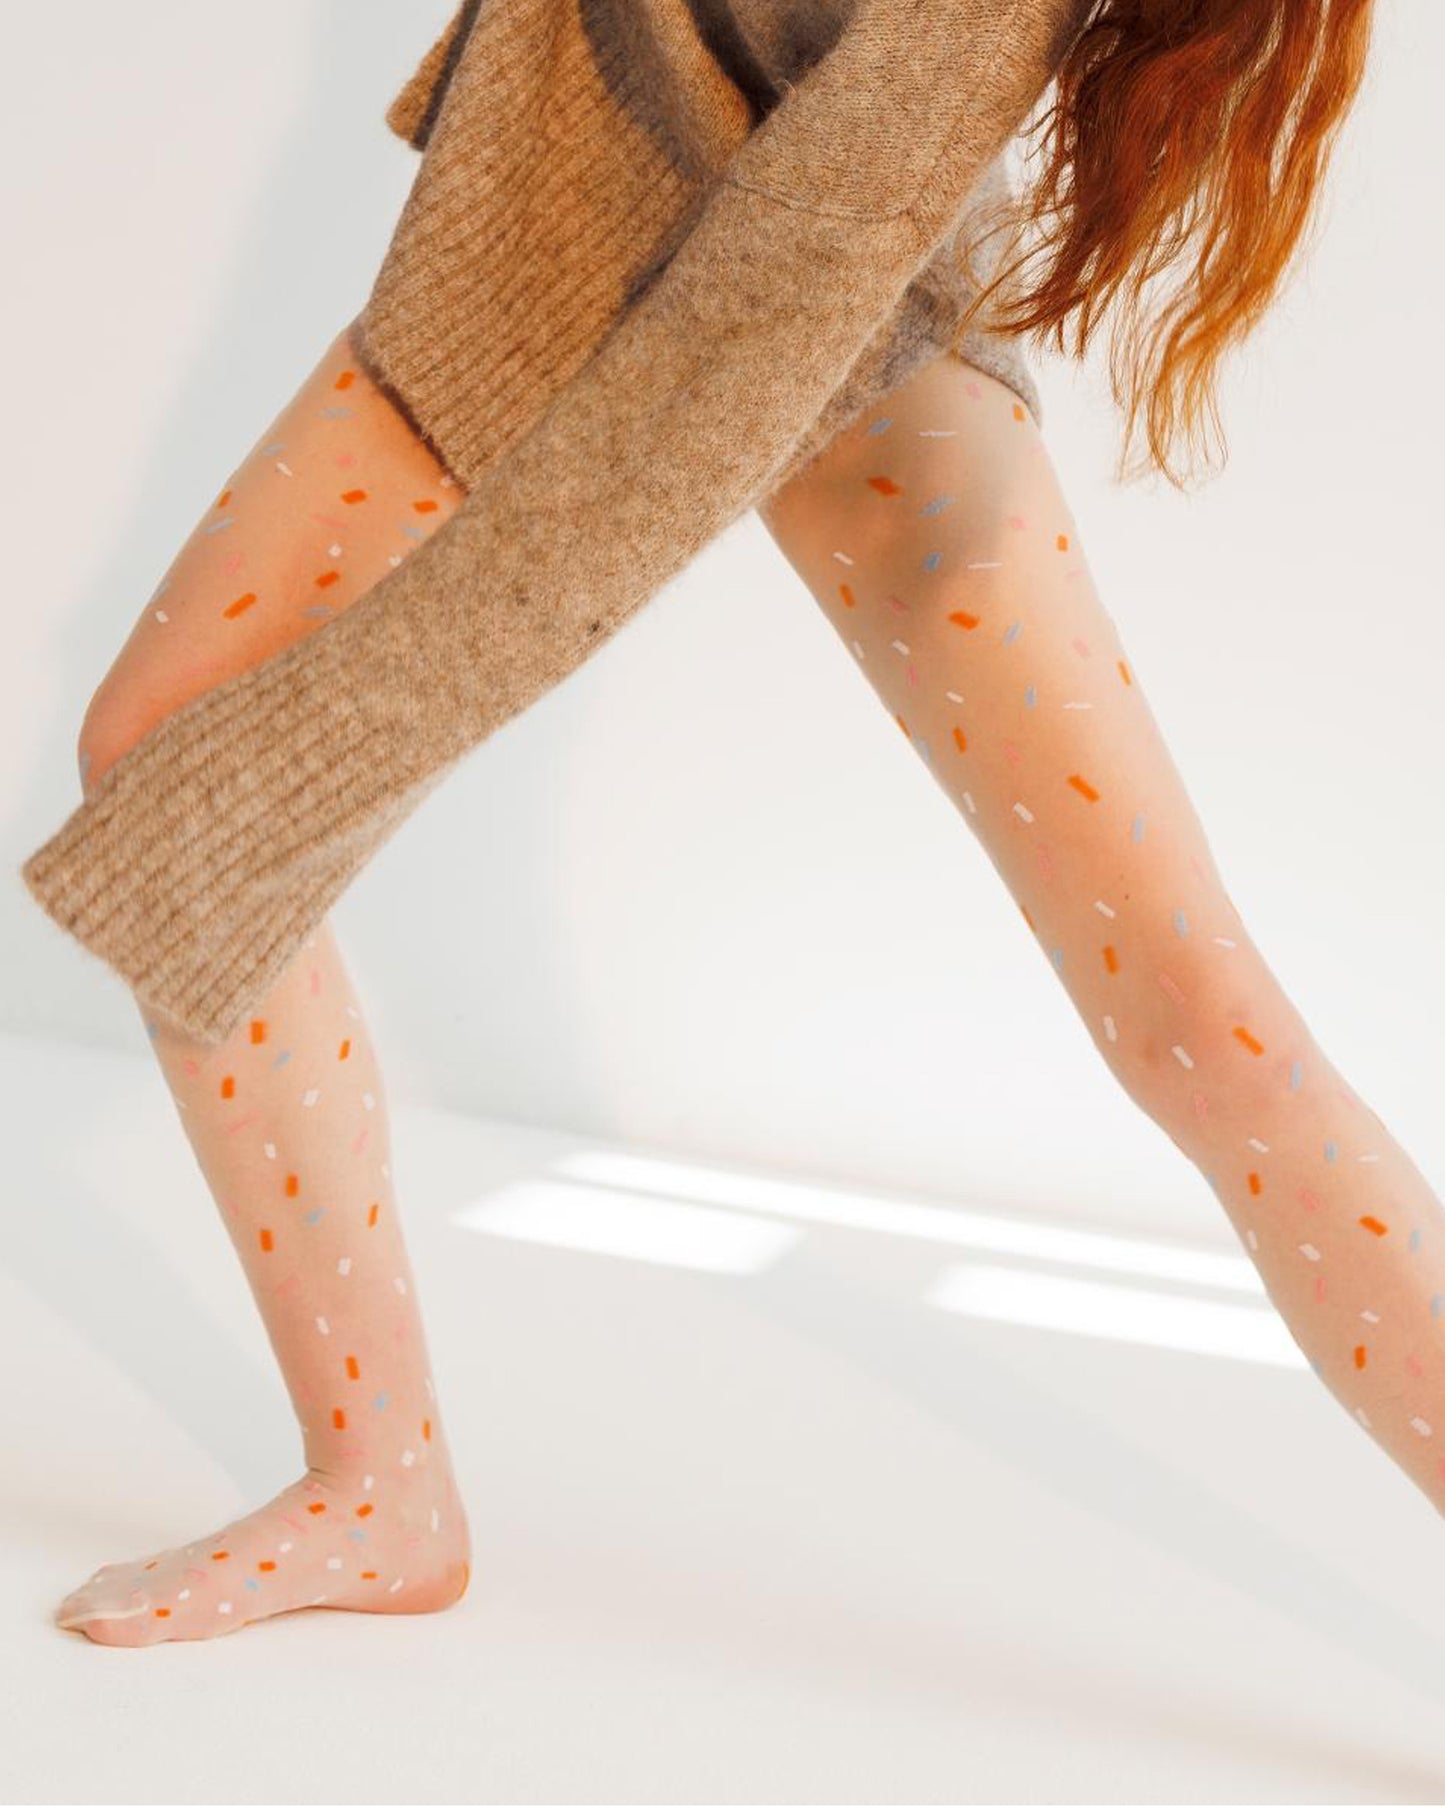 Sneaky Fox Digo Tights - Sheer light nude micro mesh fashion tights with a woven colourful sprinkle style pattern in white, orange light blue and pink with cotton gusset, flat seams, deep comfort waistband.